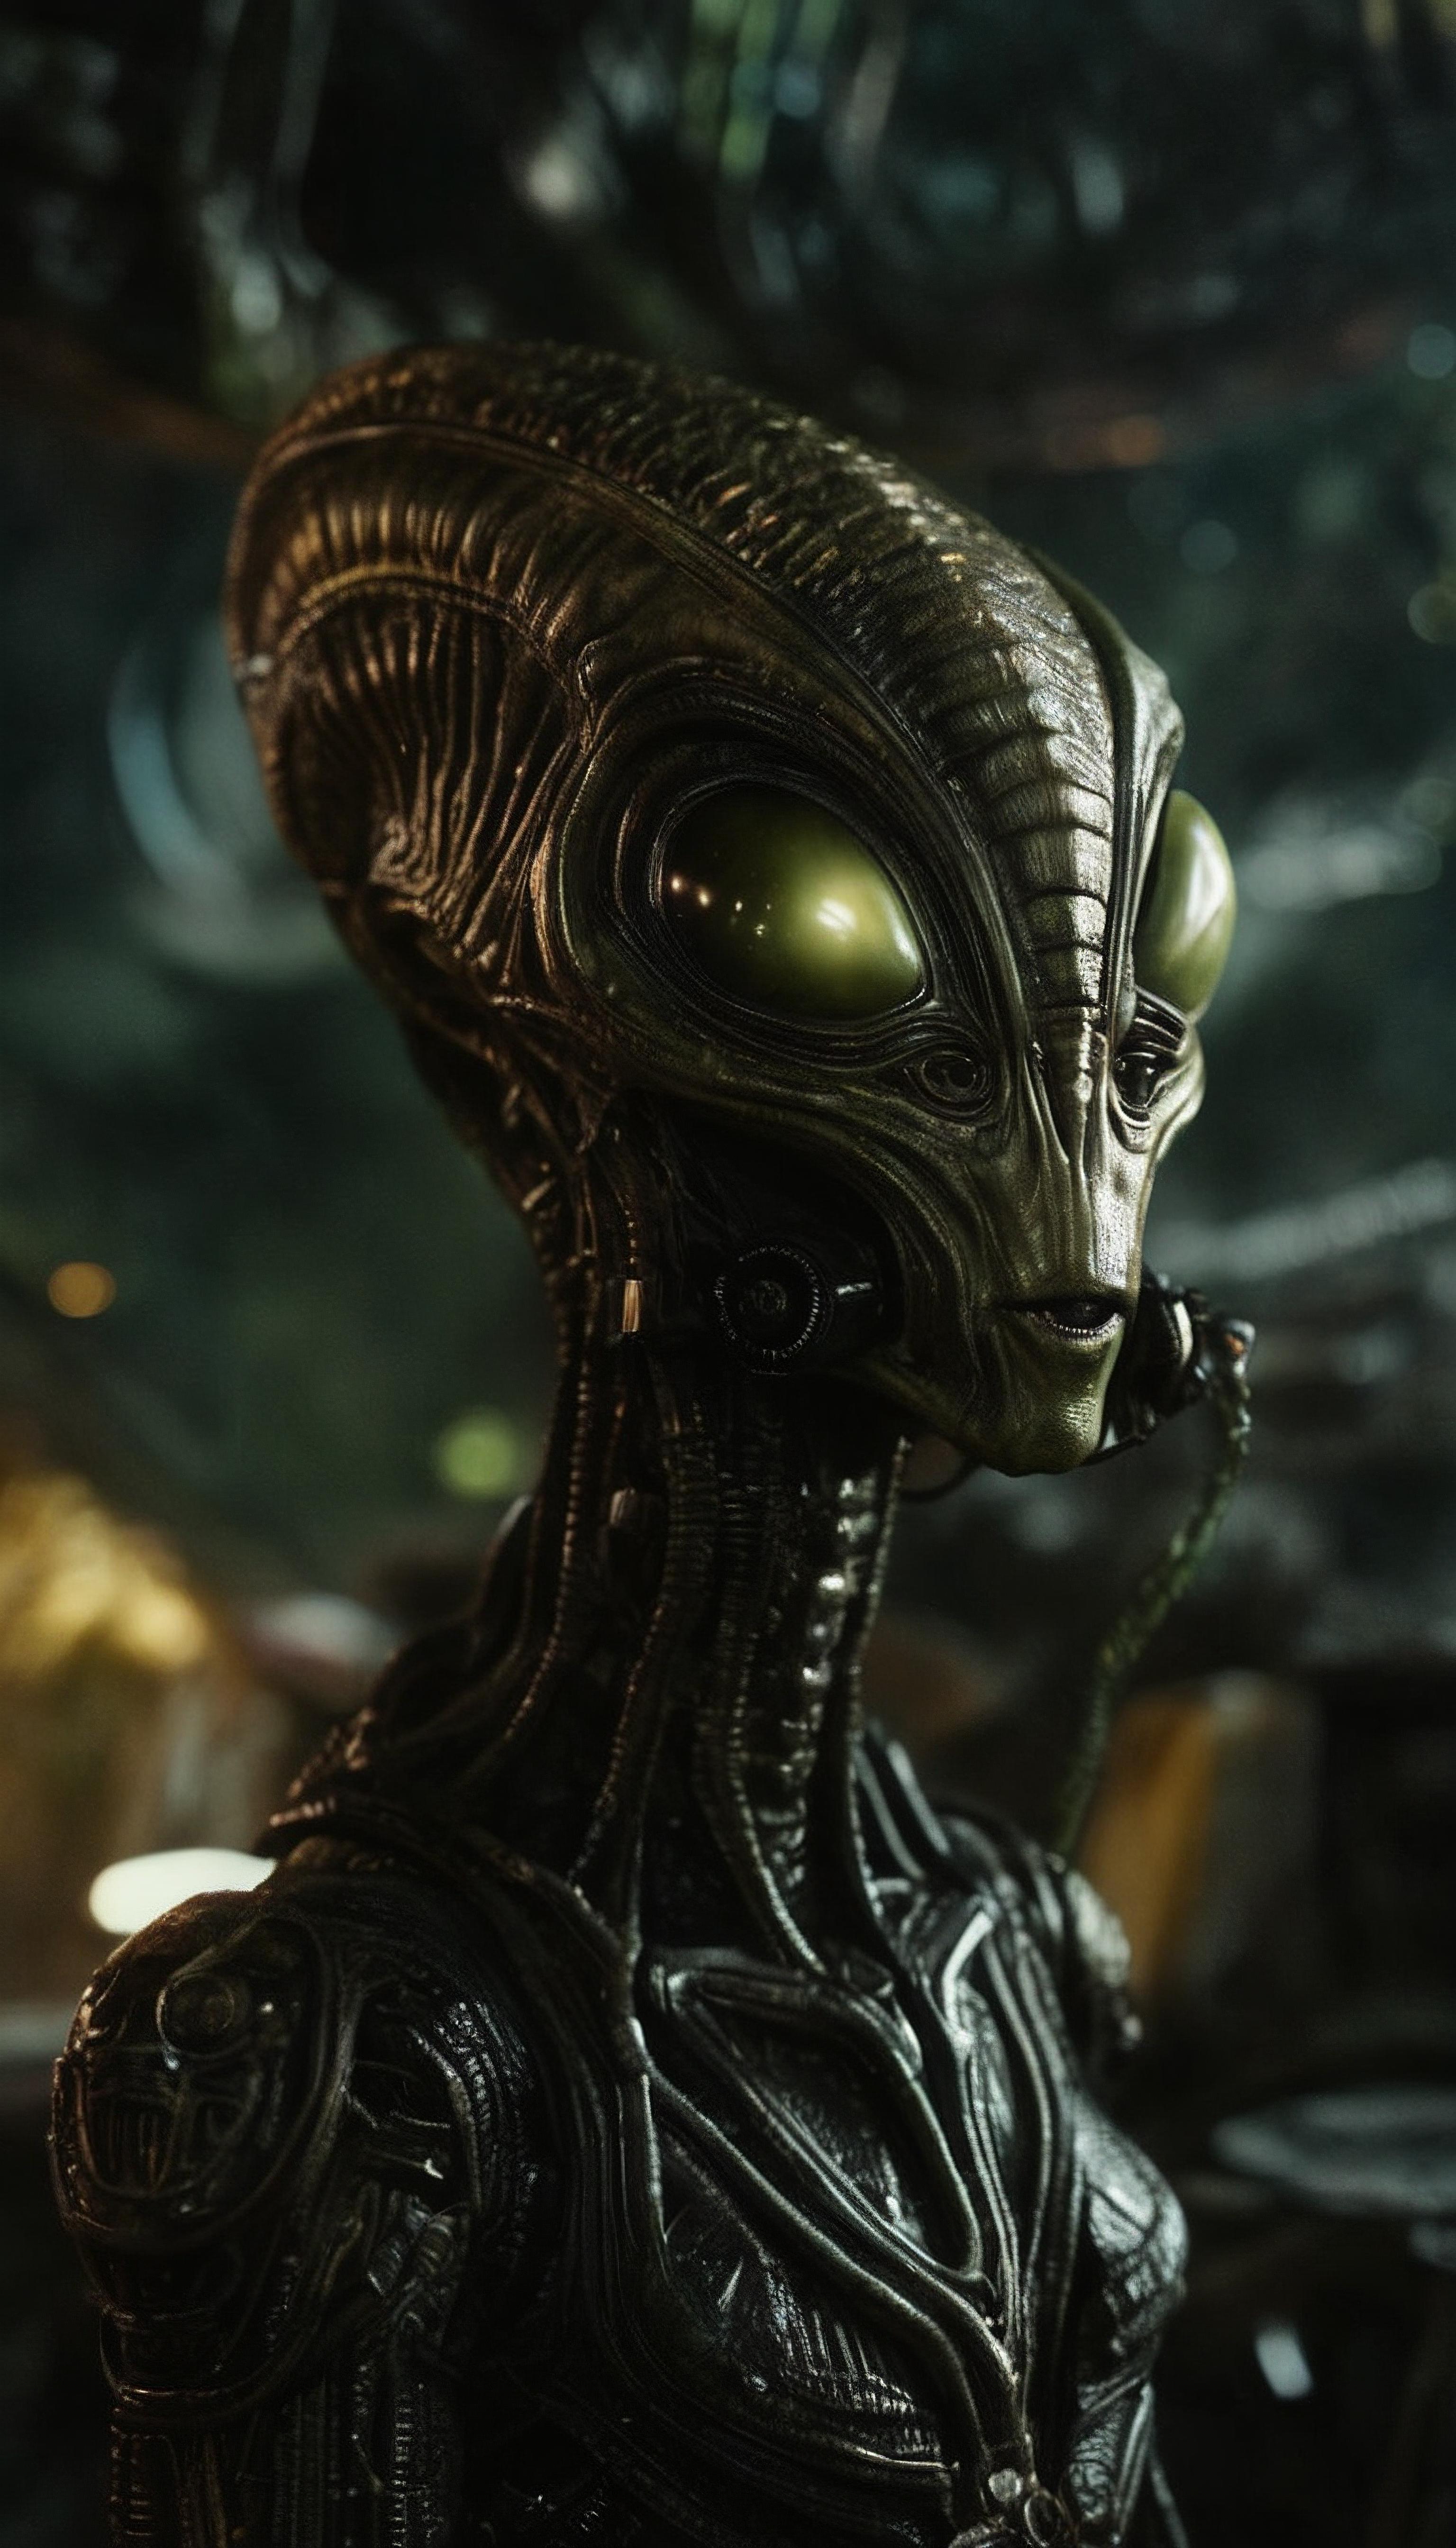 A close-up of an alien creature's face with yellow eyes and a green forehead.